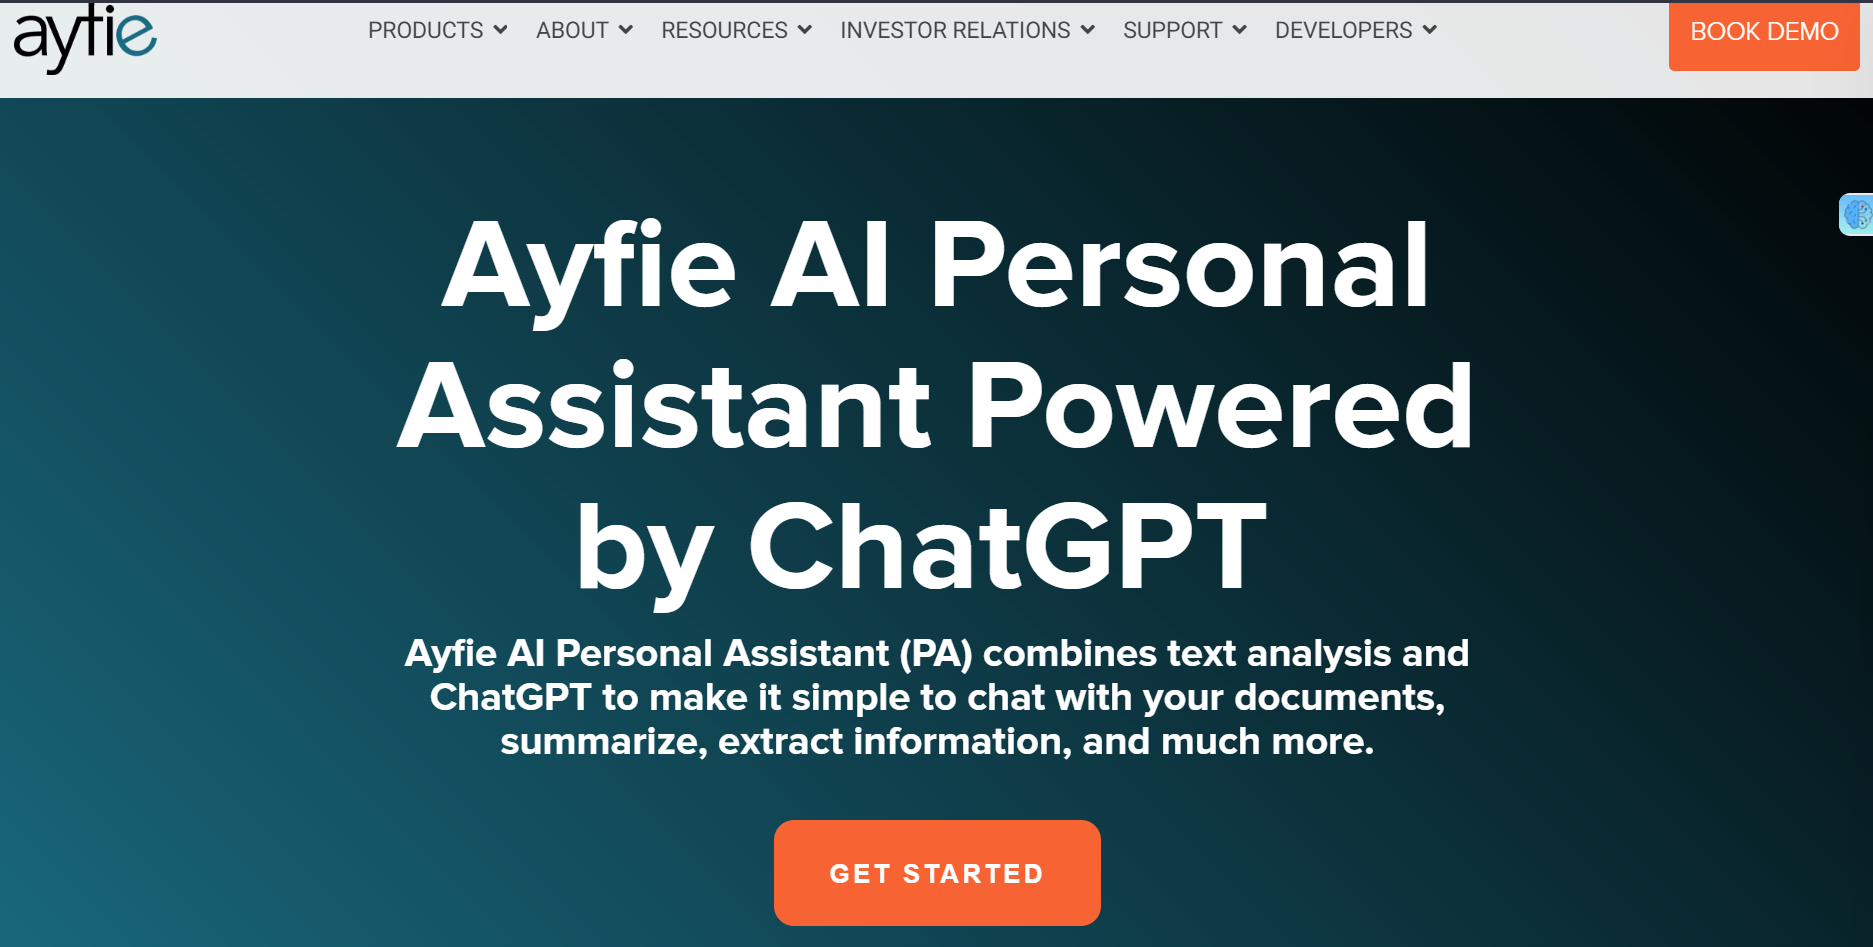  With Ayfie, You Access All Your Data